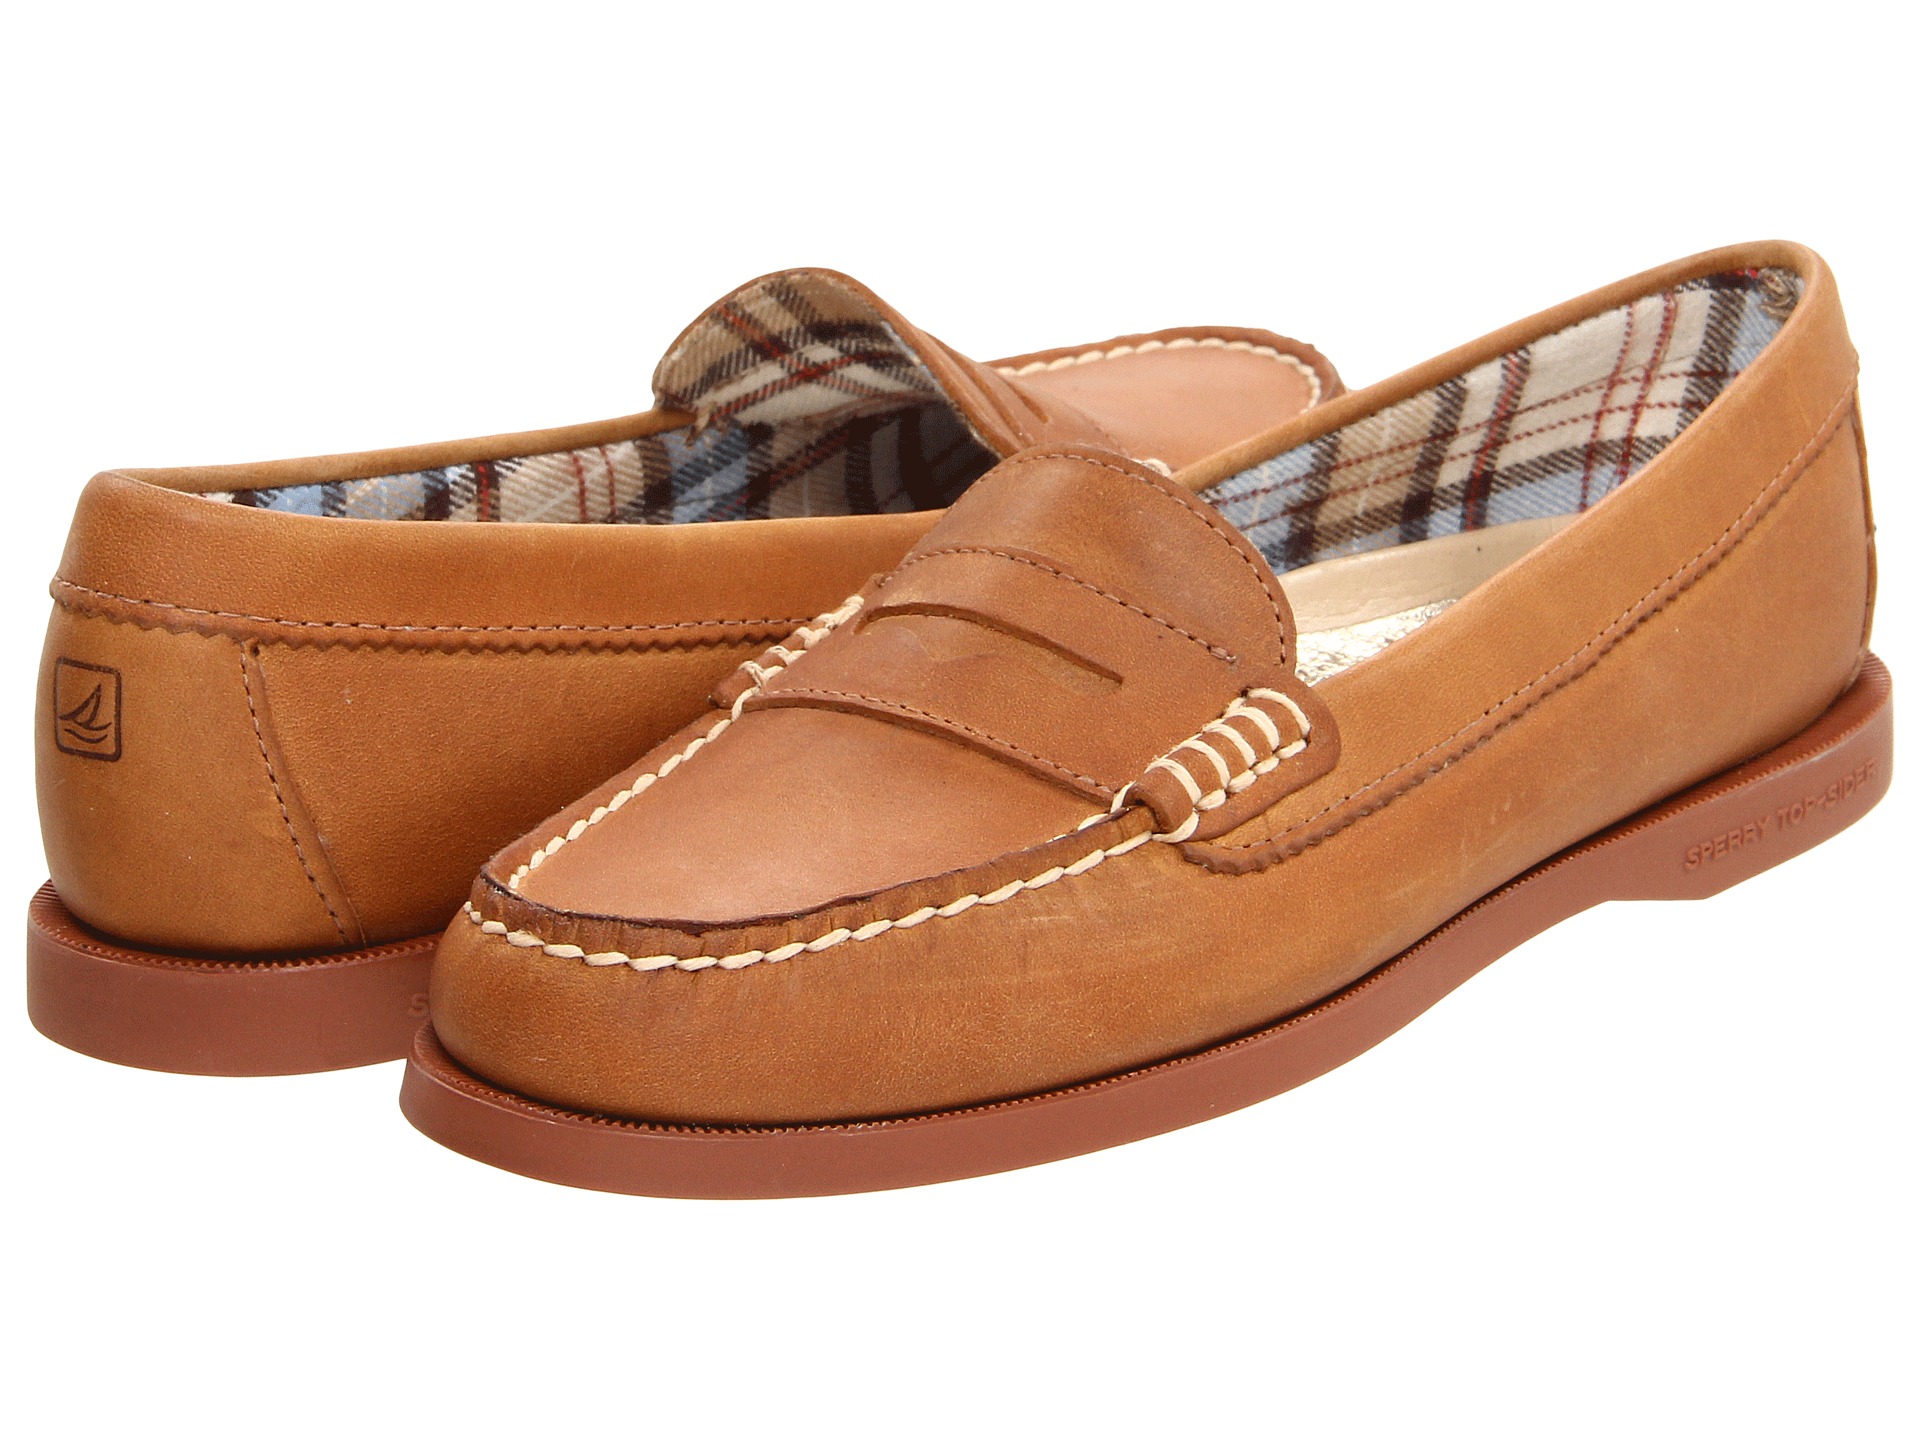 Sperry Top Sider Hayden Sahara | Shipped Free at Zappos